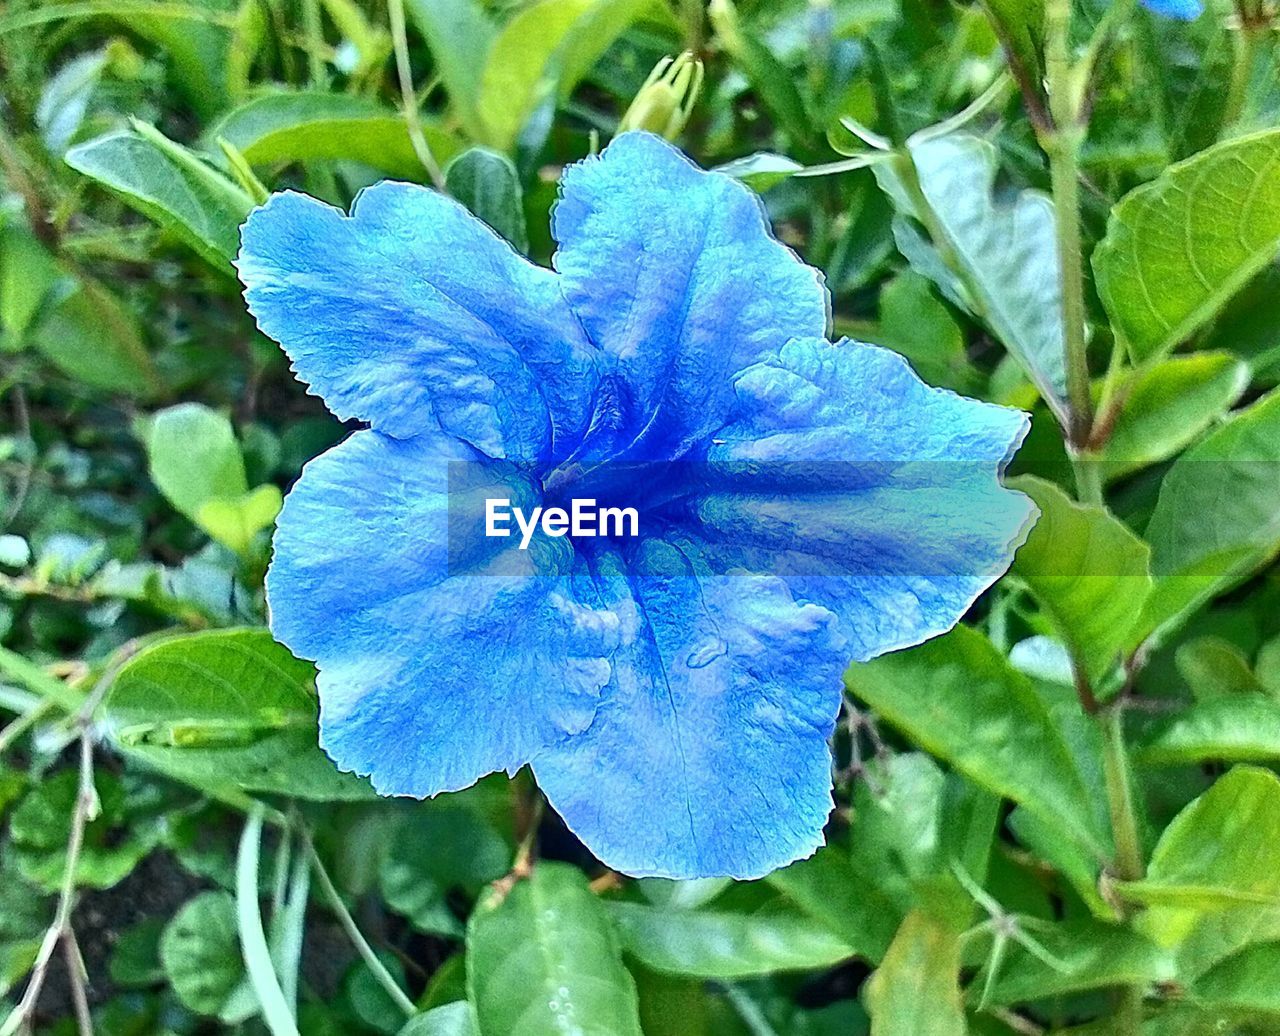 CLOSE-UP OF BLUE FLOWER BLOOMING IN PARK